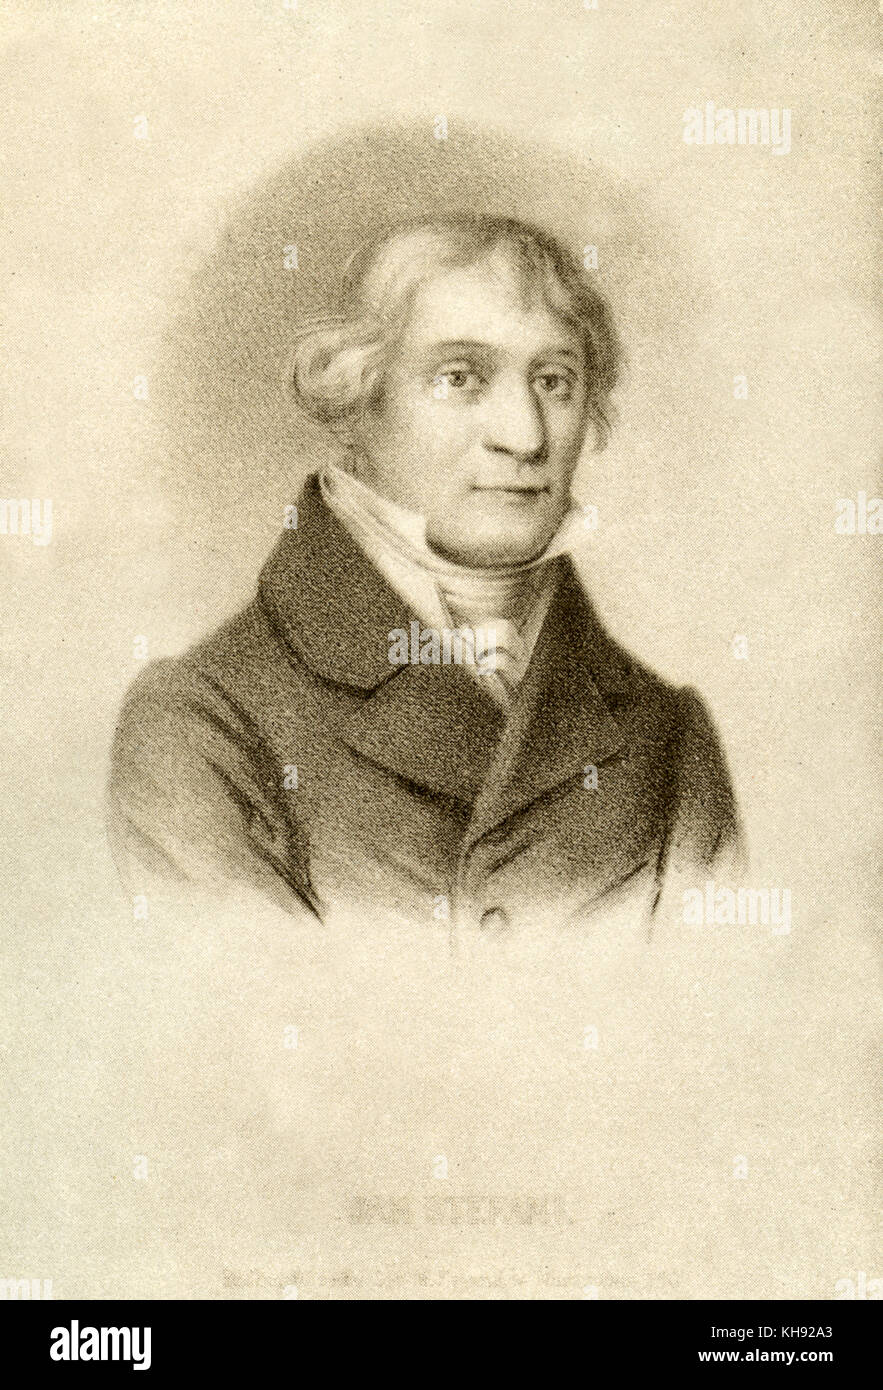 Jan Stefani - lithograph by Maksymilian Fajans after portrait by unknown artist. Polish composer, 1746 - 1826. Composed music to Krakowiacy I Gorale (Craovians and Mountaineers). 1946 - 1829. Stock Photo